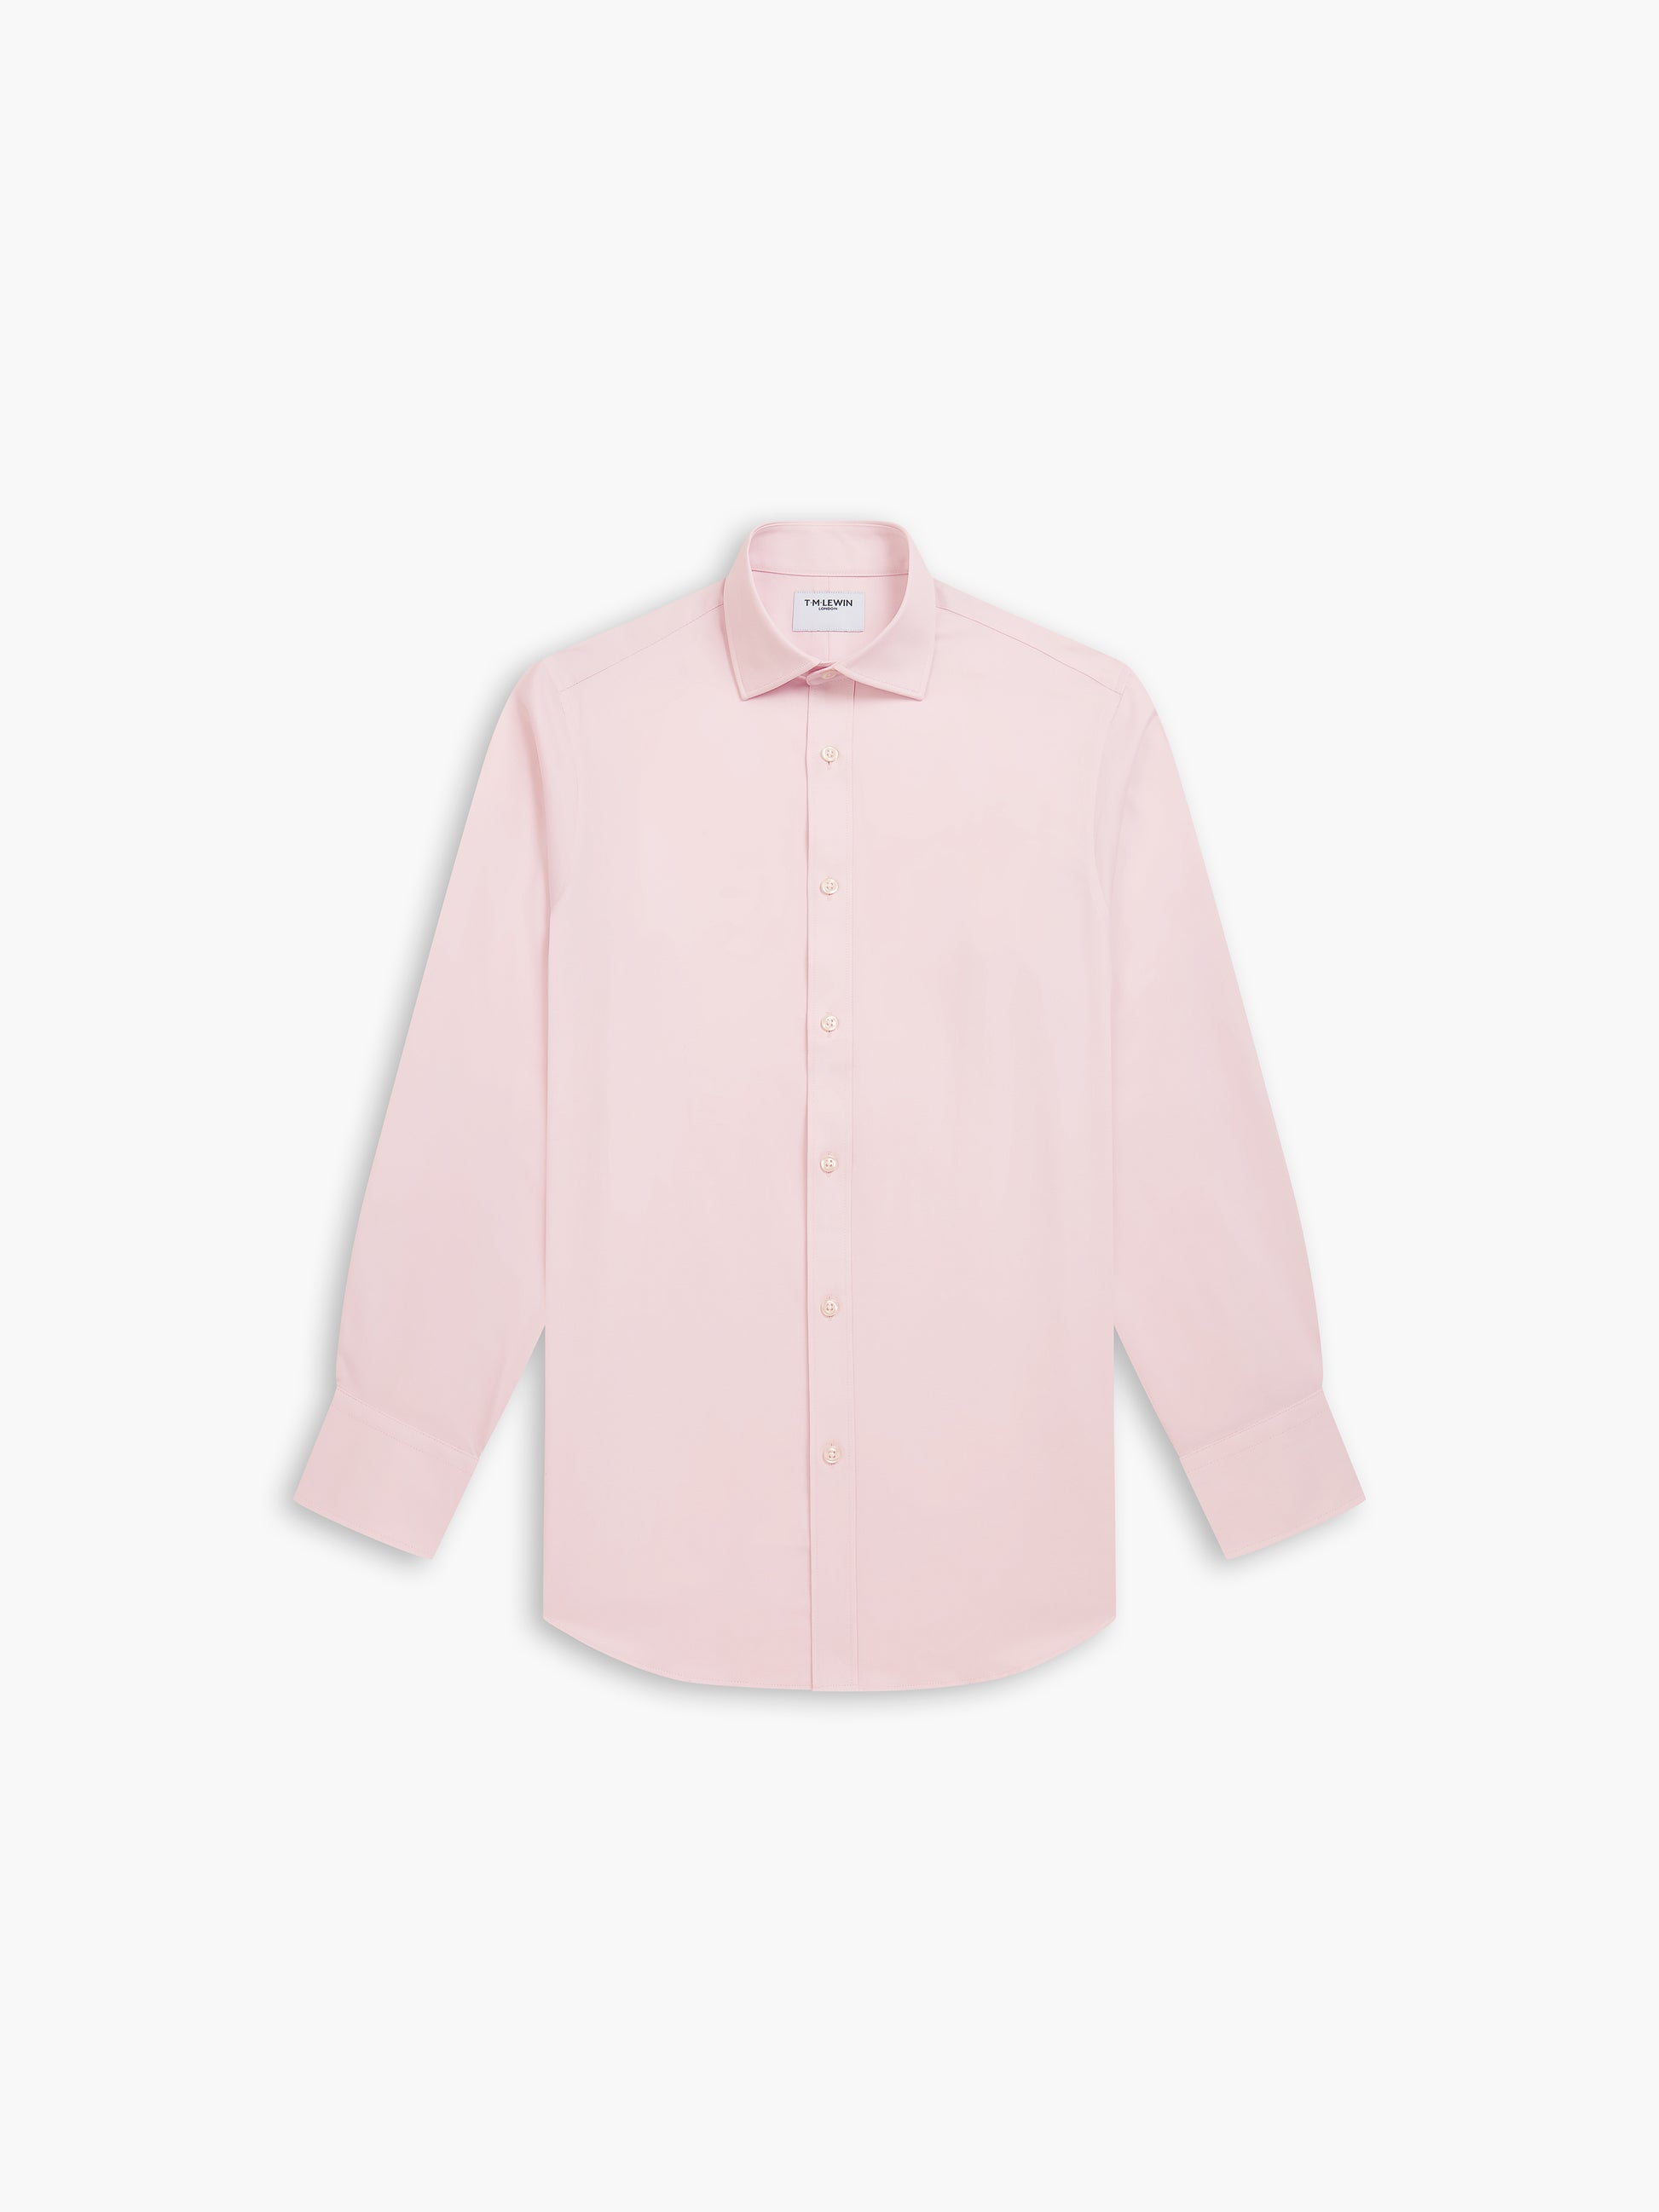 Image 2 of Max Performance Dark Pink Twill Fitted Single Cuff Classic Collar Shirt